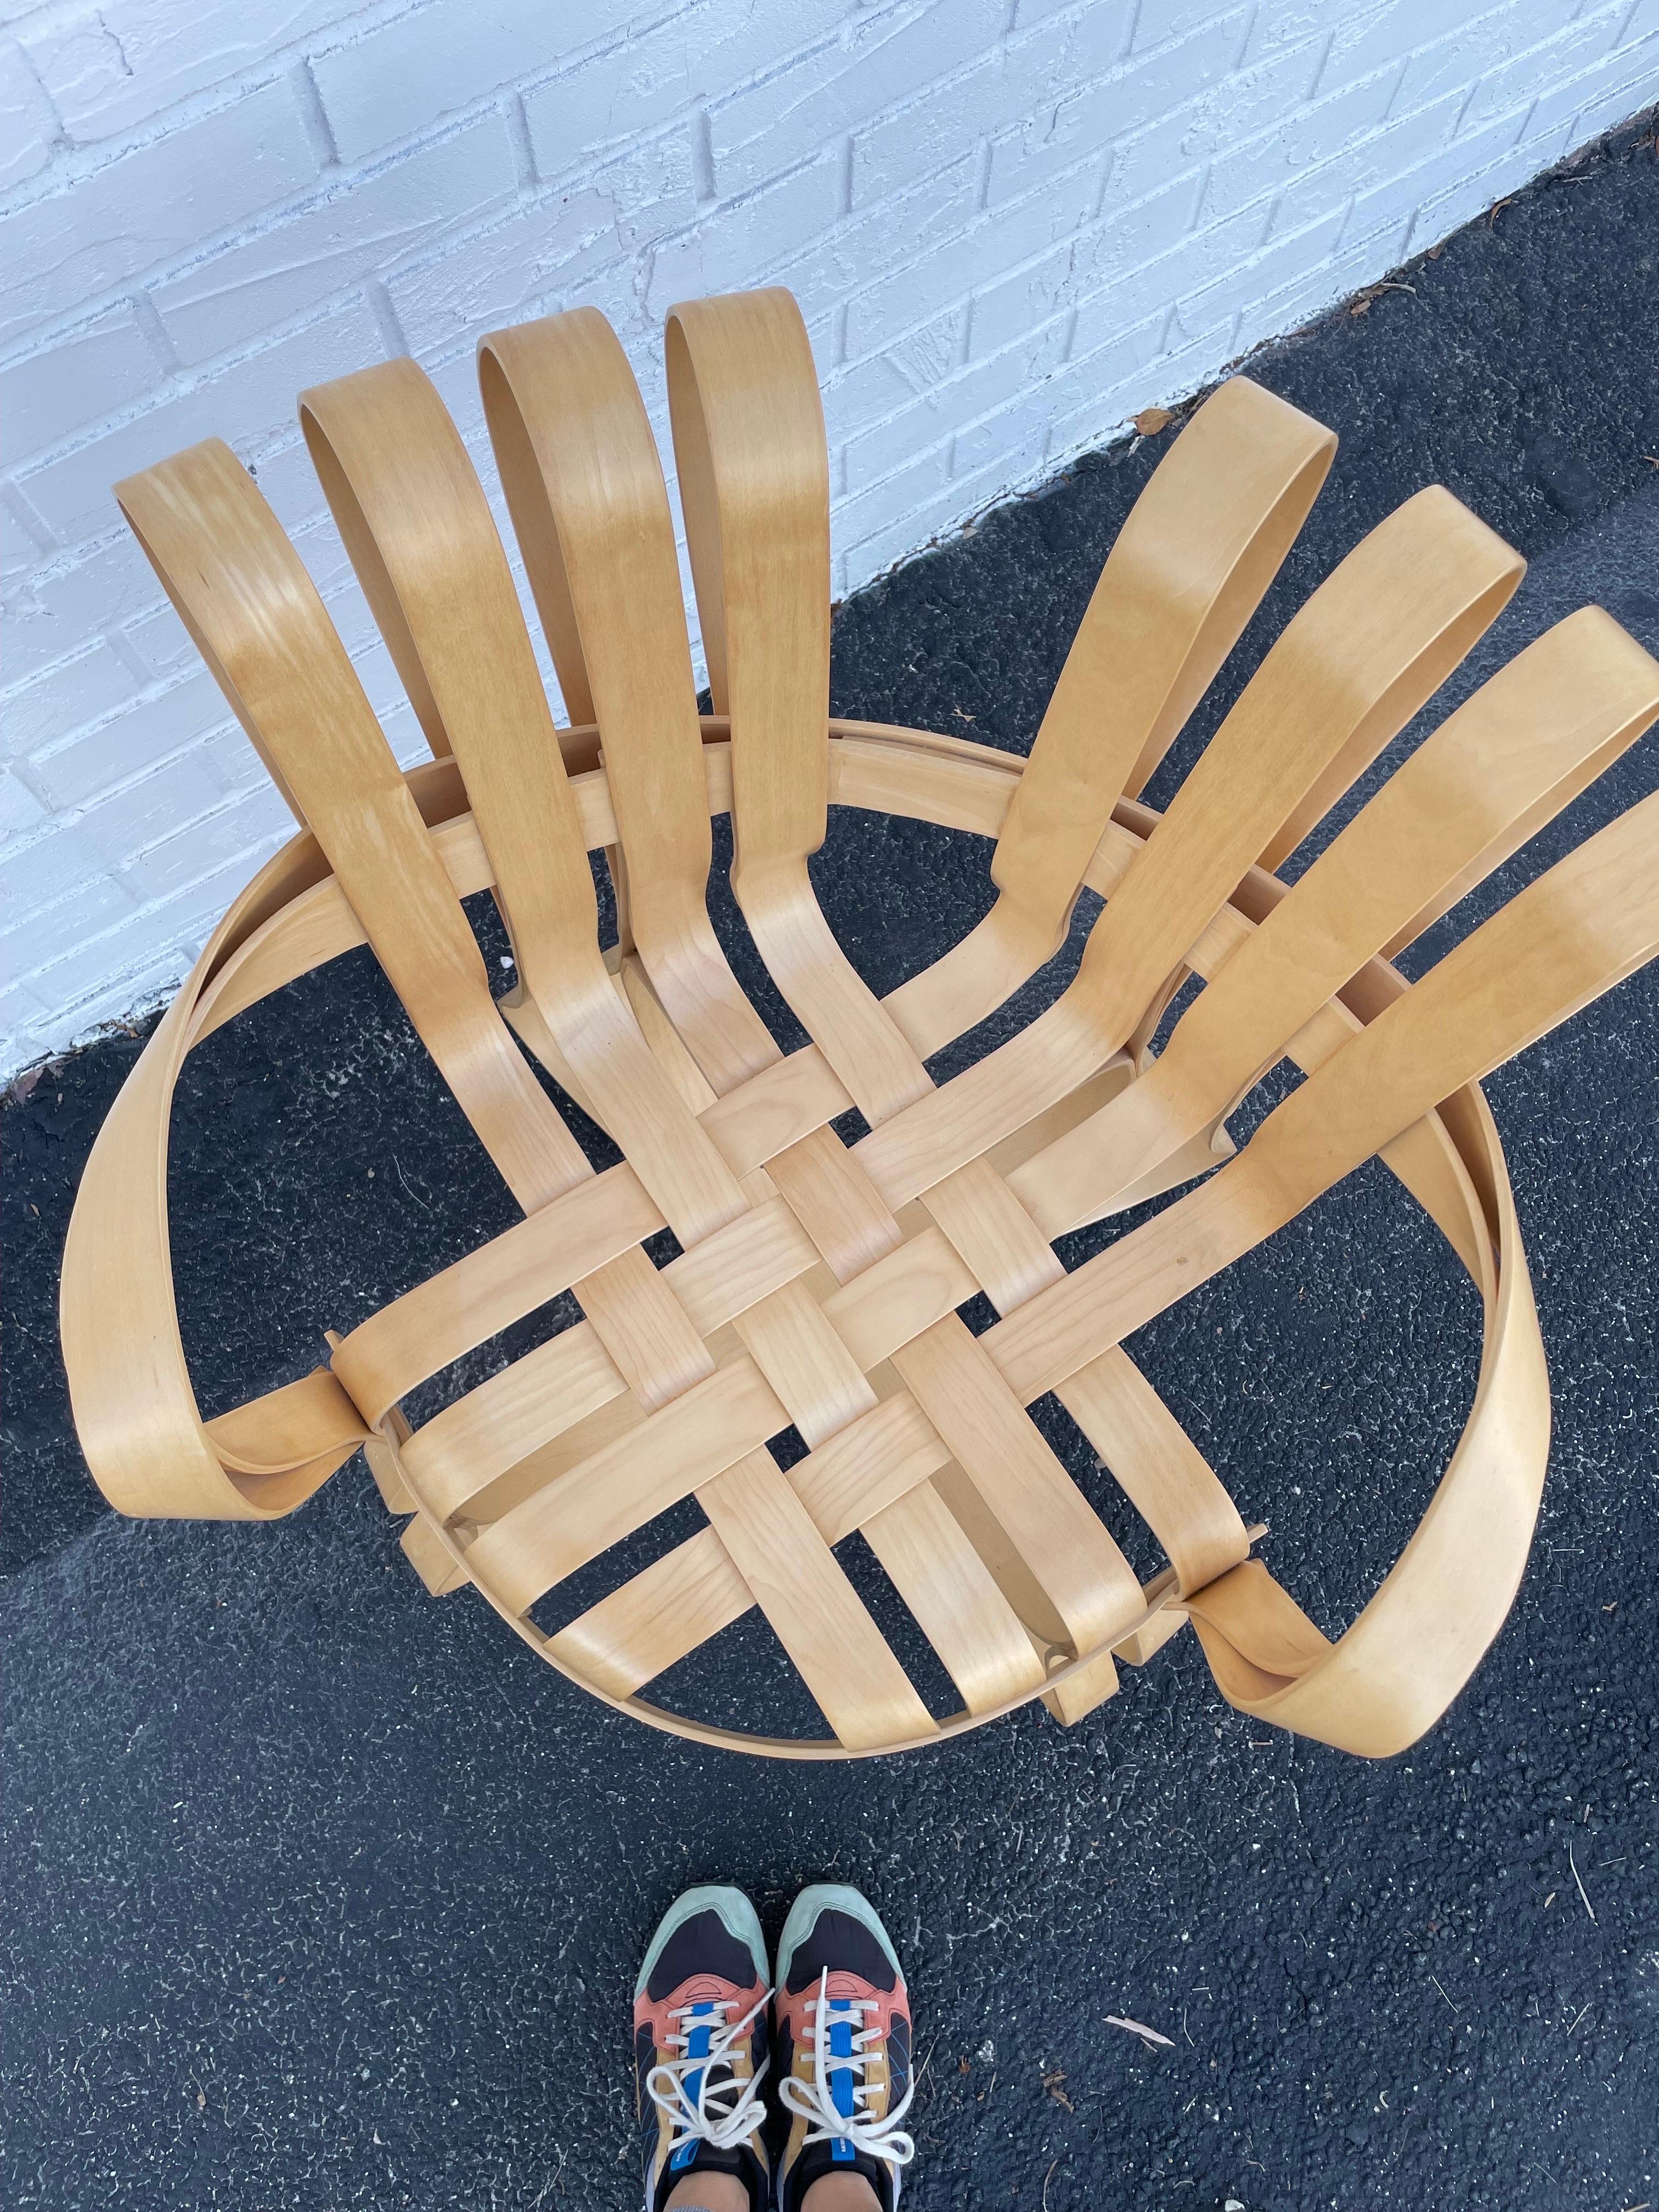 1990s Frank Gehry Cross Check Chair for Knoll. Original Knoll Cushion. Stamped.